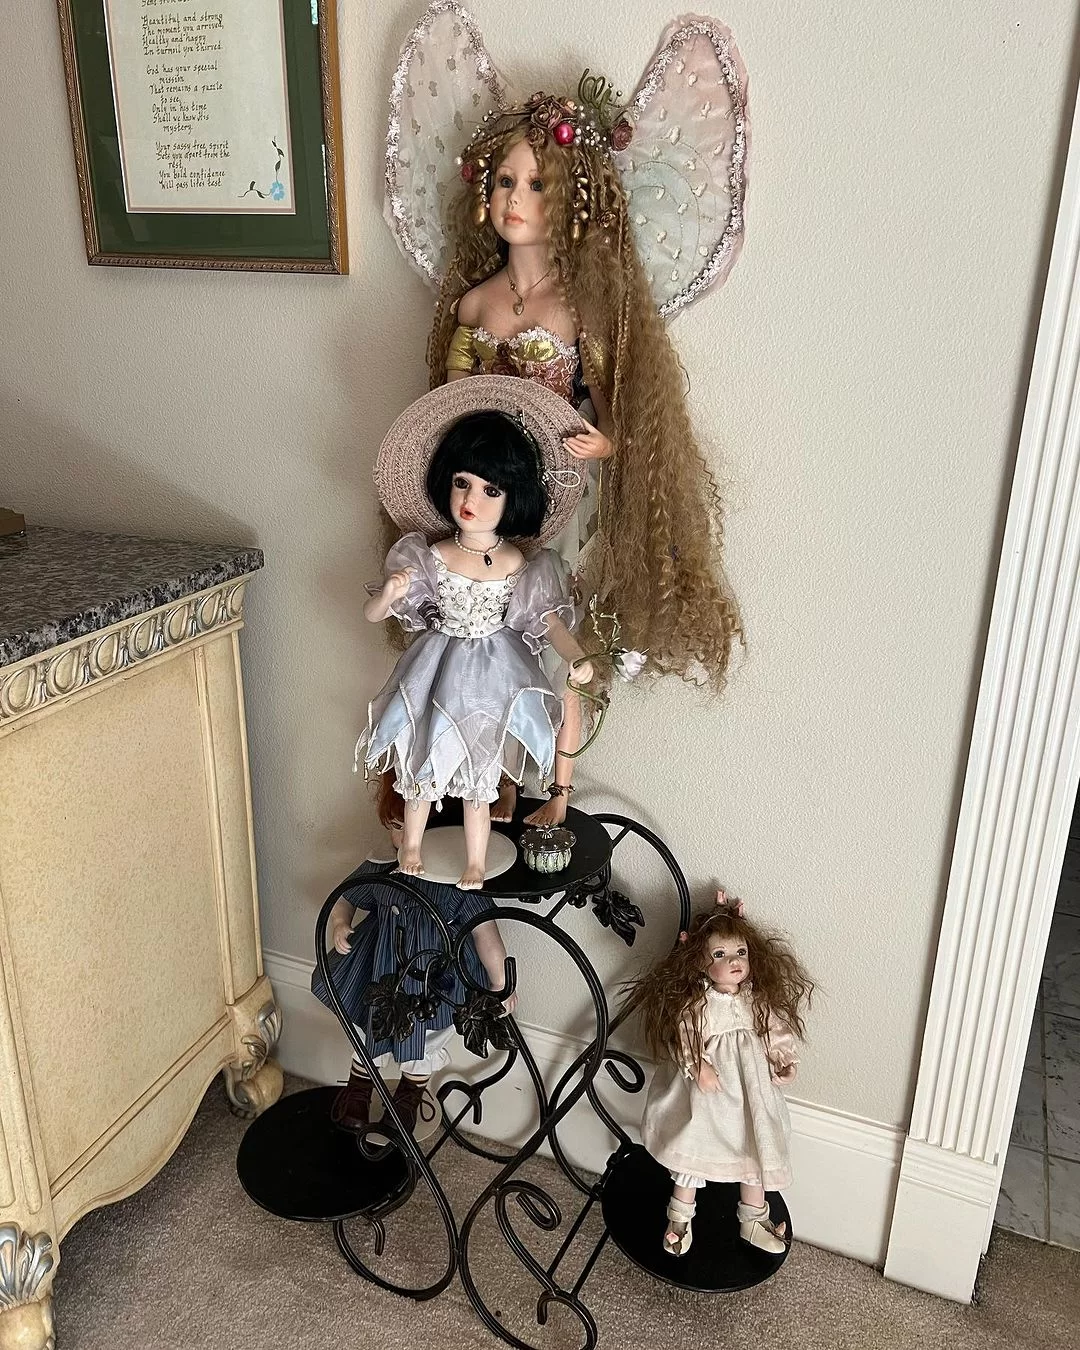 Lynne publishes supposed dolls mentioned by Britney (Reproduction/Instagram/lynnespears_rf) Lorena Bueri